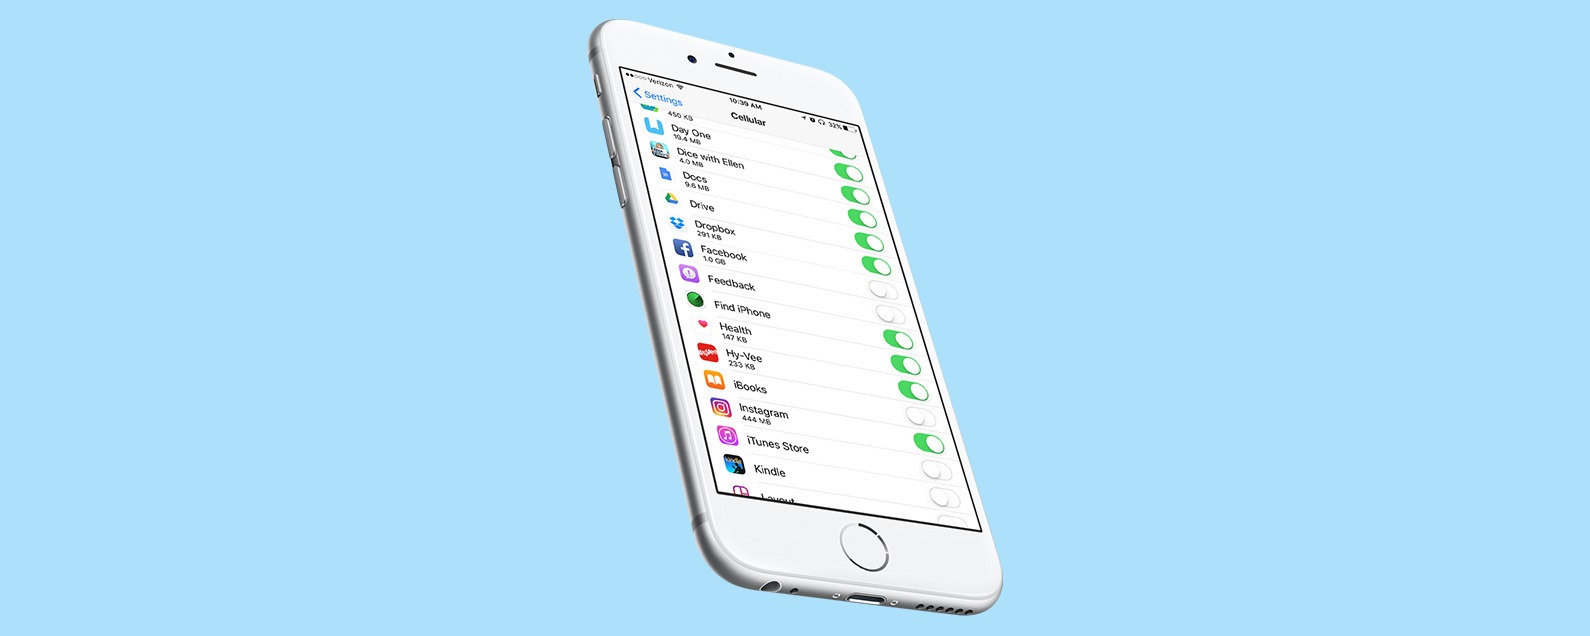 How To Protect Your iPhone's Location Data On iOS 11